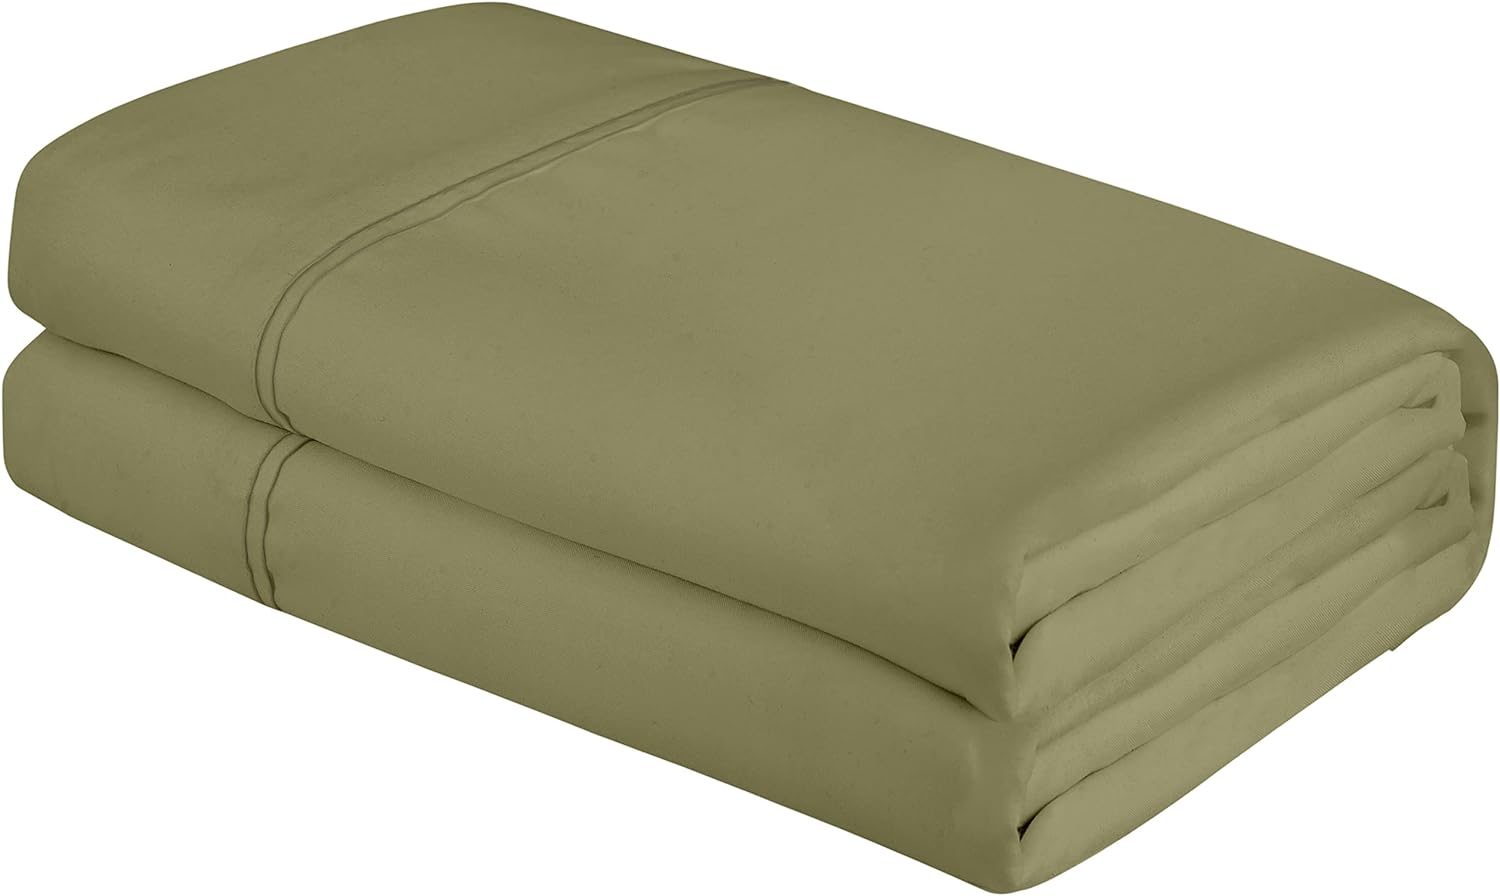 Royale Linens Queen Size Flat Sheet Only - Brushed 1800 Microfiber - Ultra Soft & Breathable - Wrinkle&Stain Resistant - Hotel Quality Flat Sheet Sold Separately - Top Sheet For Bed (Queen Sage Green)